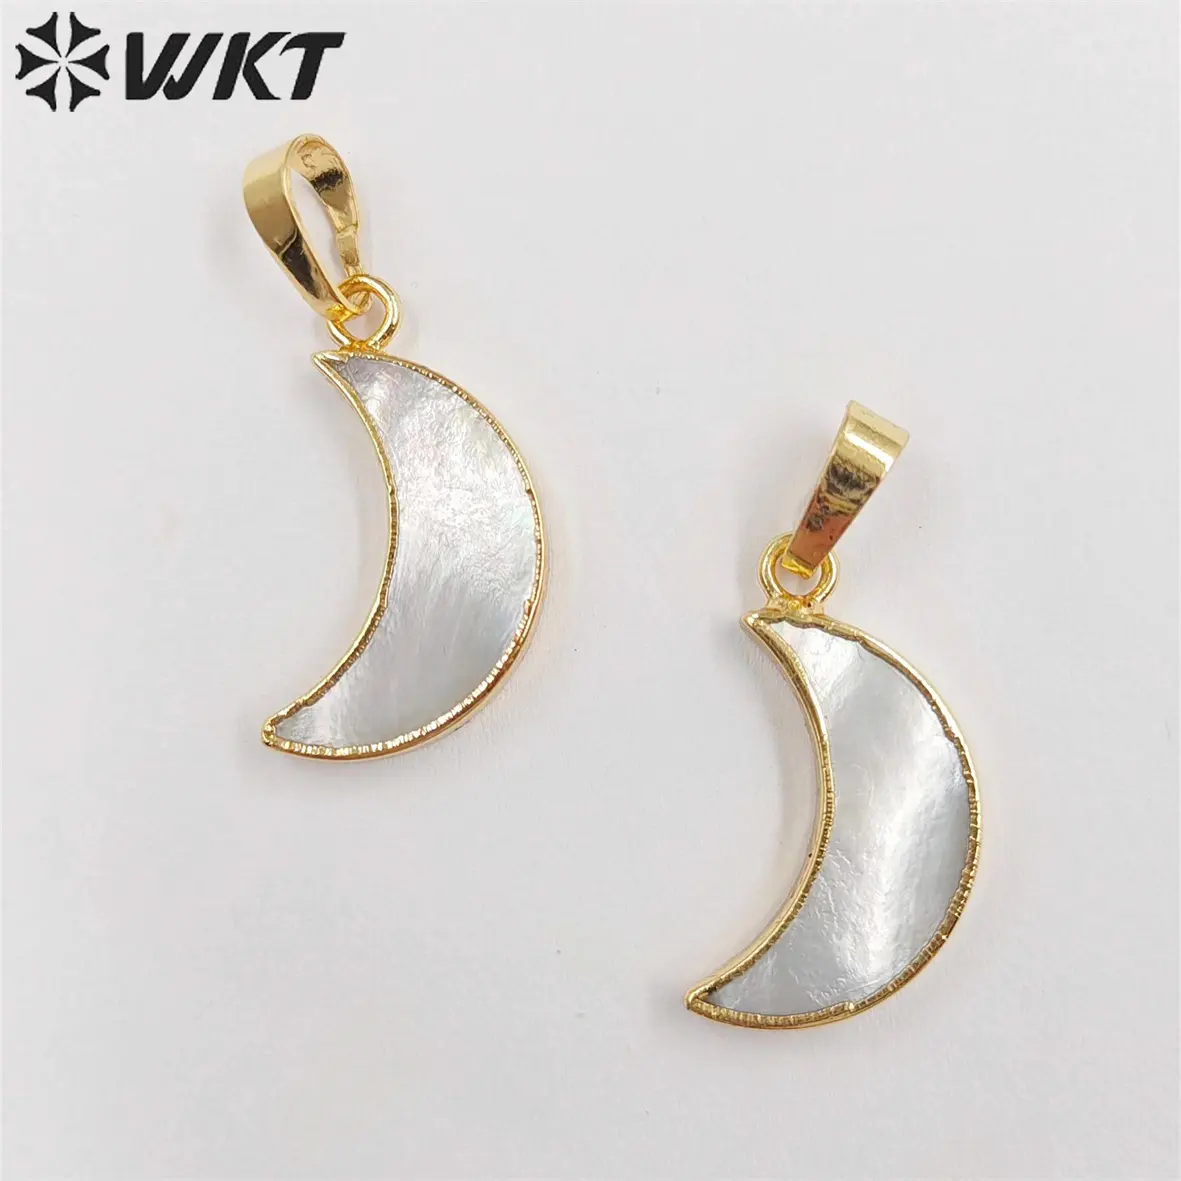 WT-P1253 WKT New Fashion Unique Design Popular Jewelry Moon Shape Real Gold Plated Elegant Shell Pendant